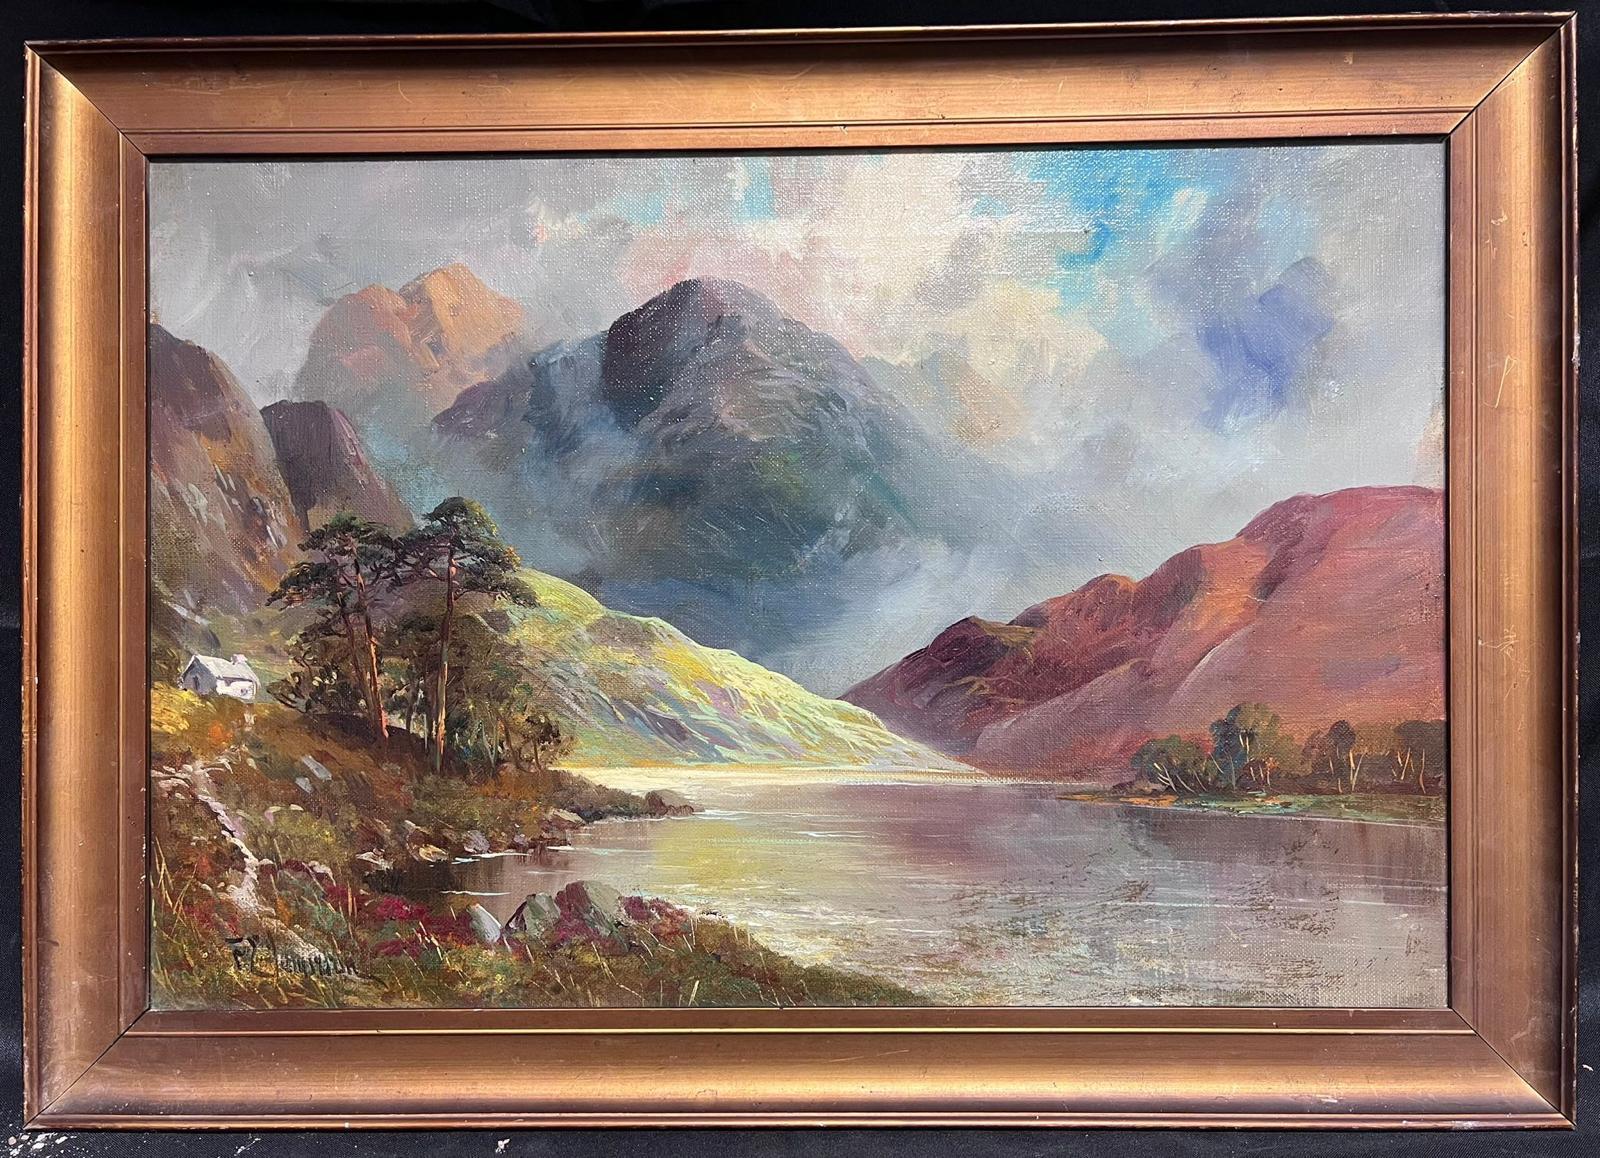 The Highland Loch
signed by F. E. Jamieson (British 1895-1950)
oil painting on canvas, framed
framed: 19.5 x 27.5 inches
canvas : 16 x 24 inches
provenance: private collection, UK
condition: very good and sound condition 
